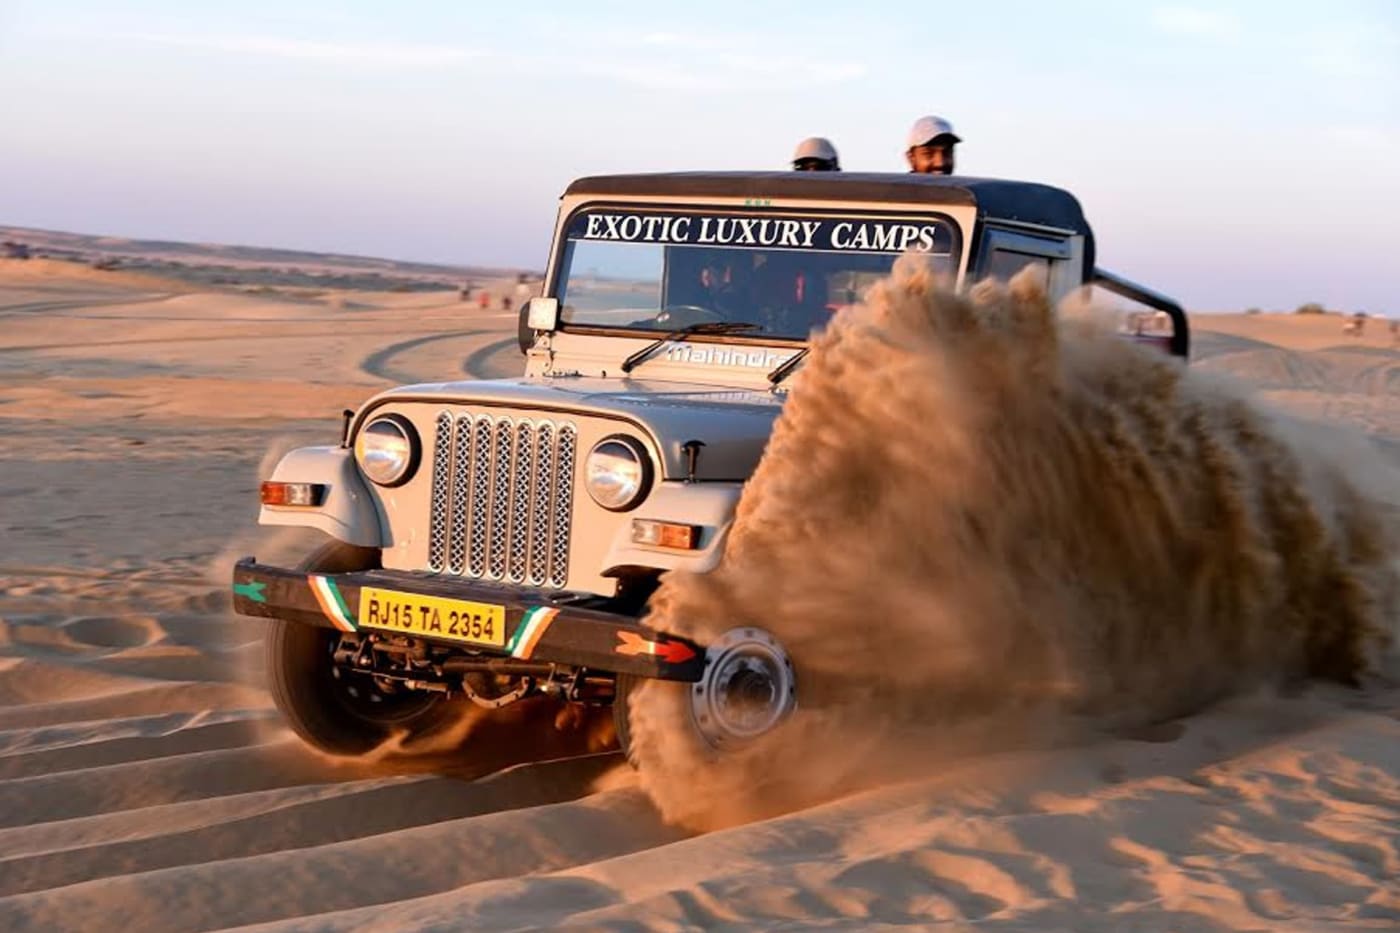 Exclusive Night Jeep Safari in Dunes at Exotic Luxury Camps in Jaisalmer